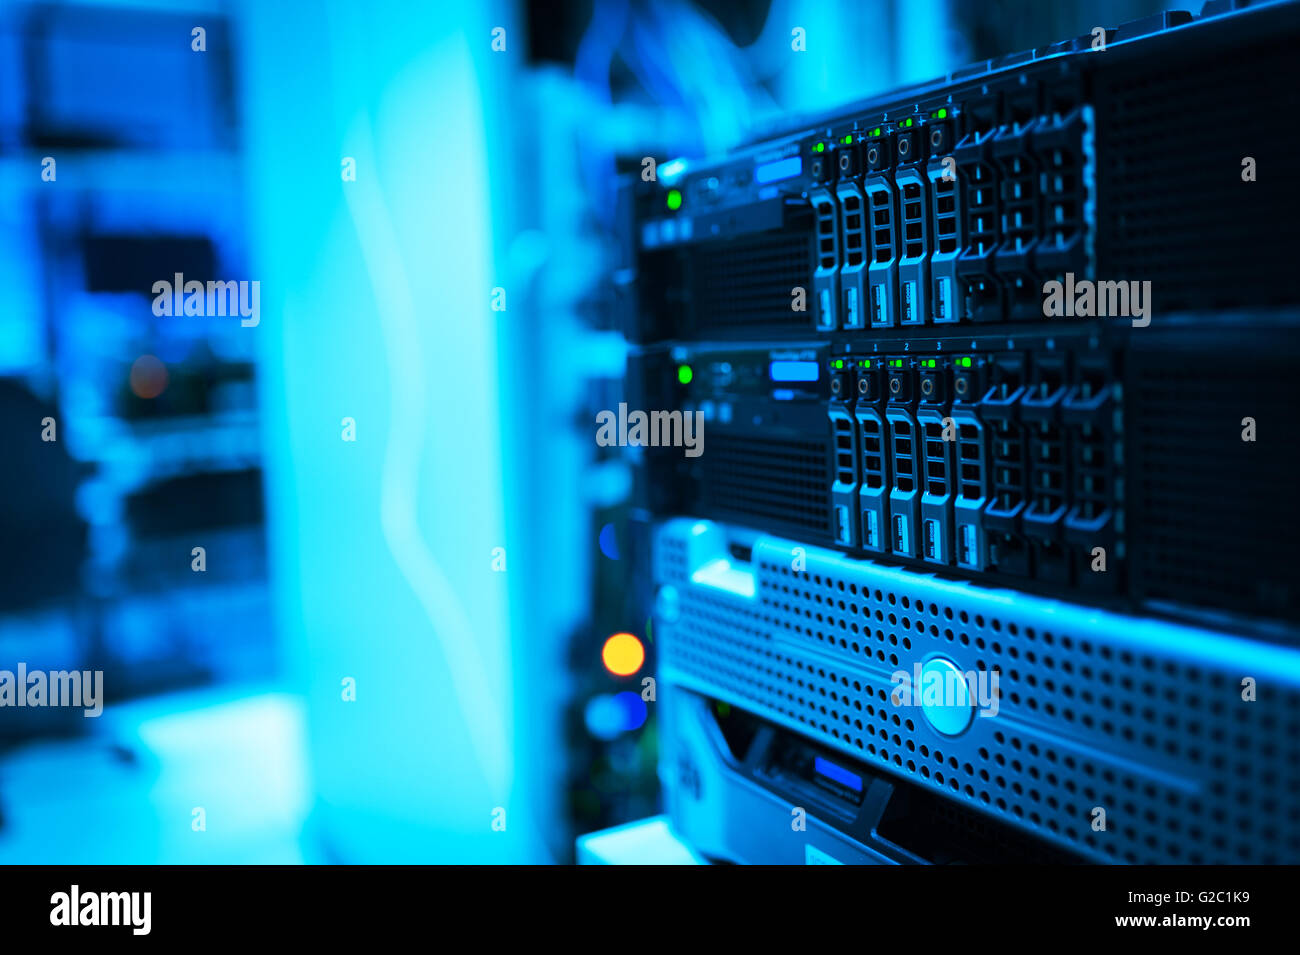 An Network servers in data room . Stock Photo